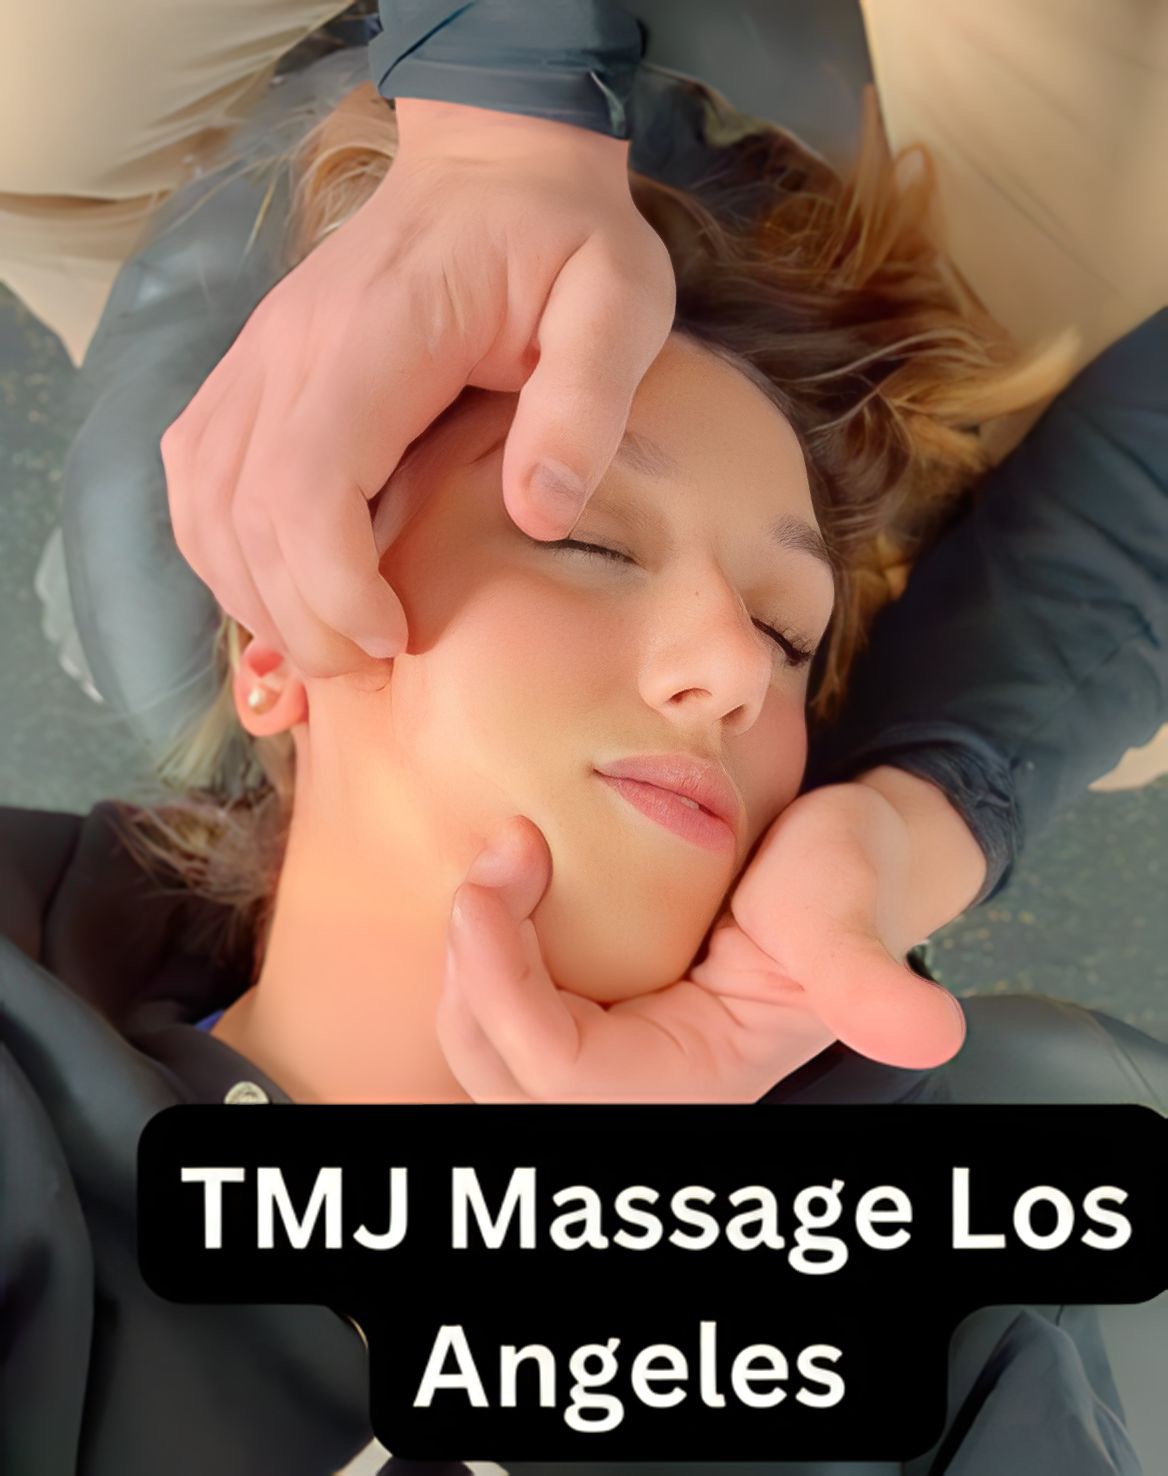 Massage being performed on the TMJ in LA